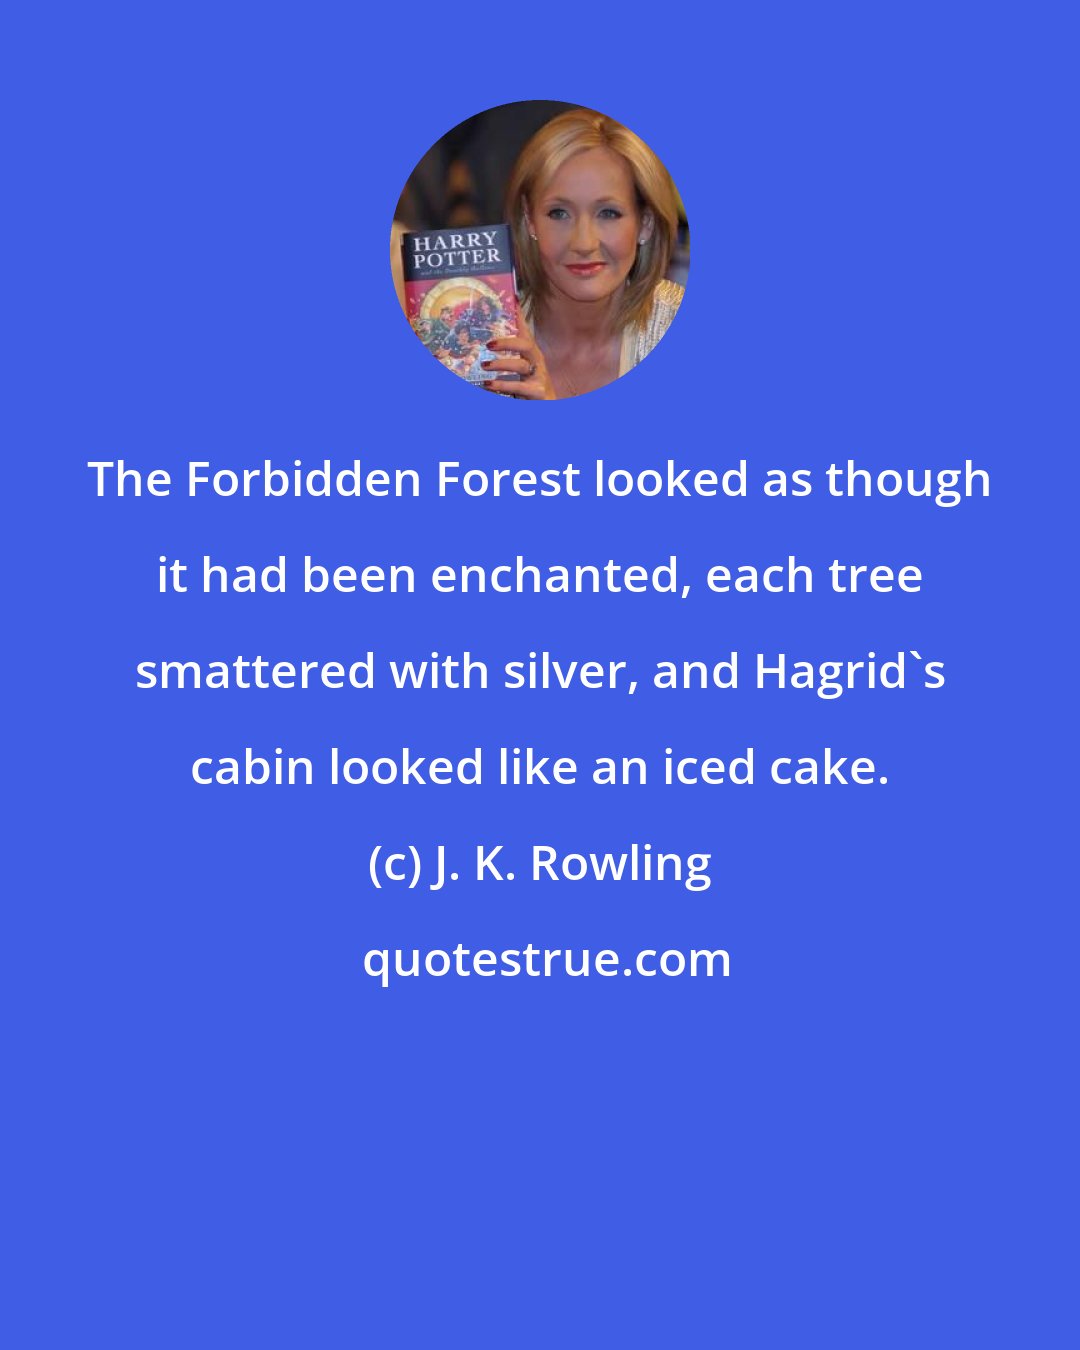 J. K. Rowling: The Forbidden Forest looked as though it had been enchanted, each tree smattered with silver, and Hagrid's cabin looked like an iced cake.